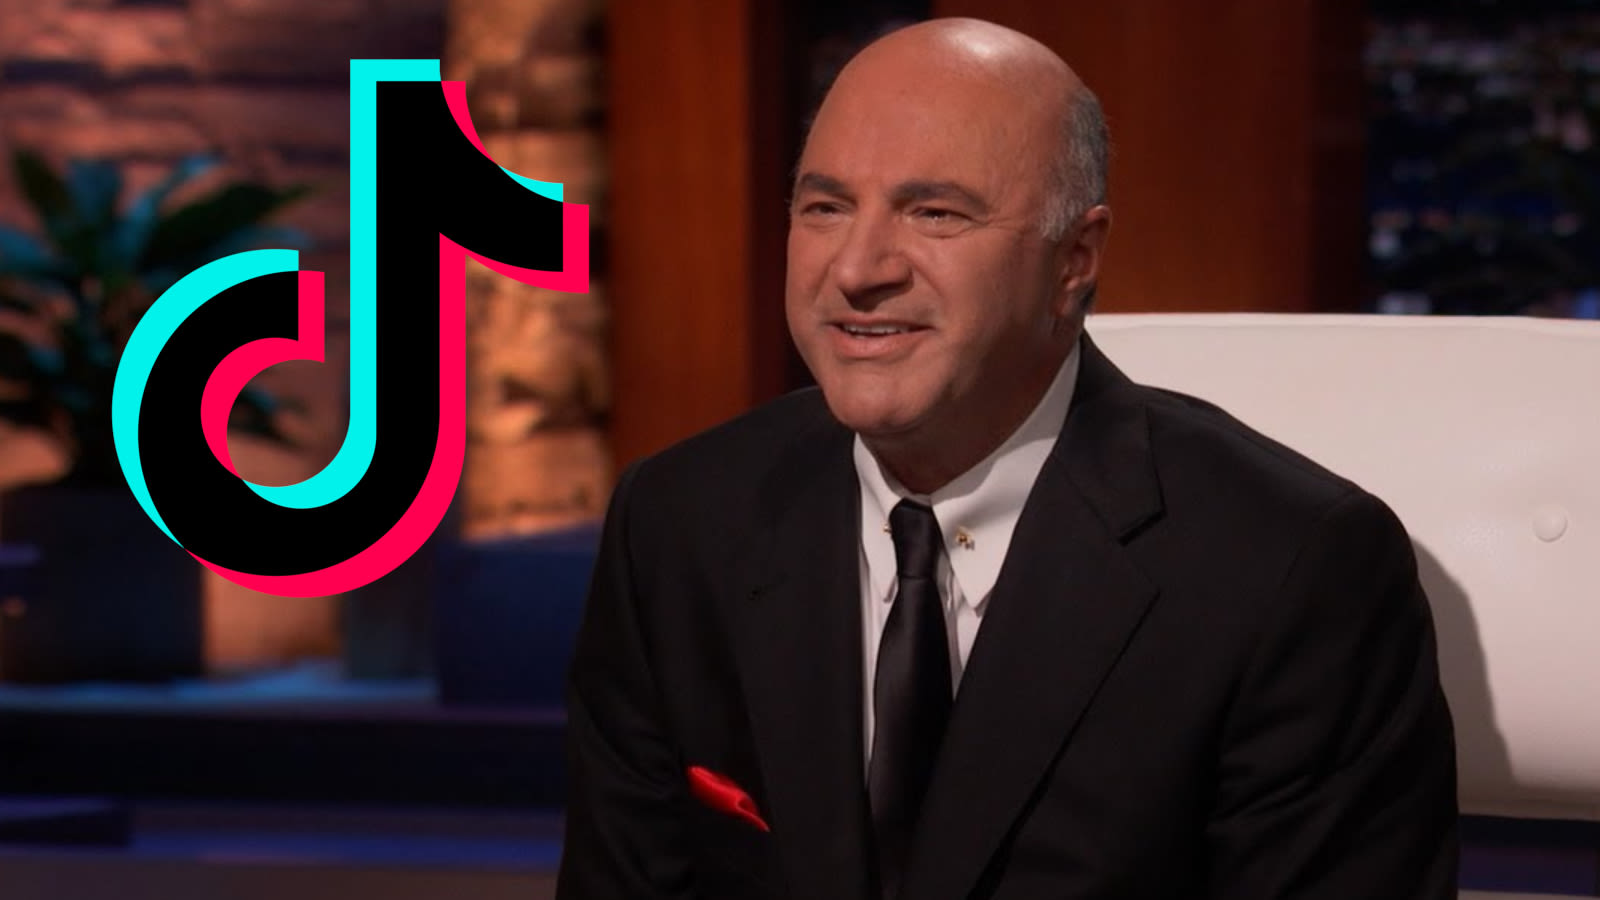 Shark Tank’s Kevin O’Leary reveals plan to buy TikTok as US ban looms - Dexerto